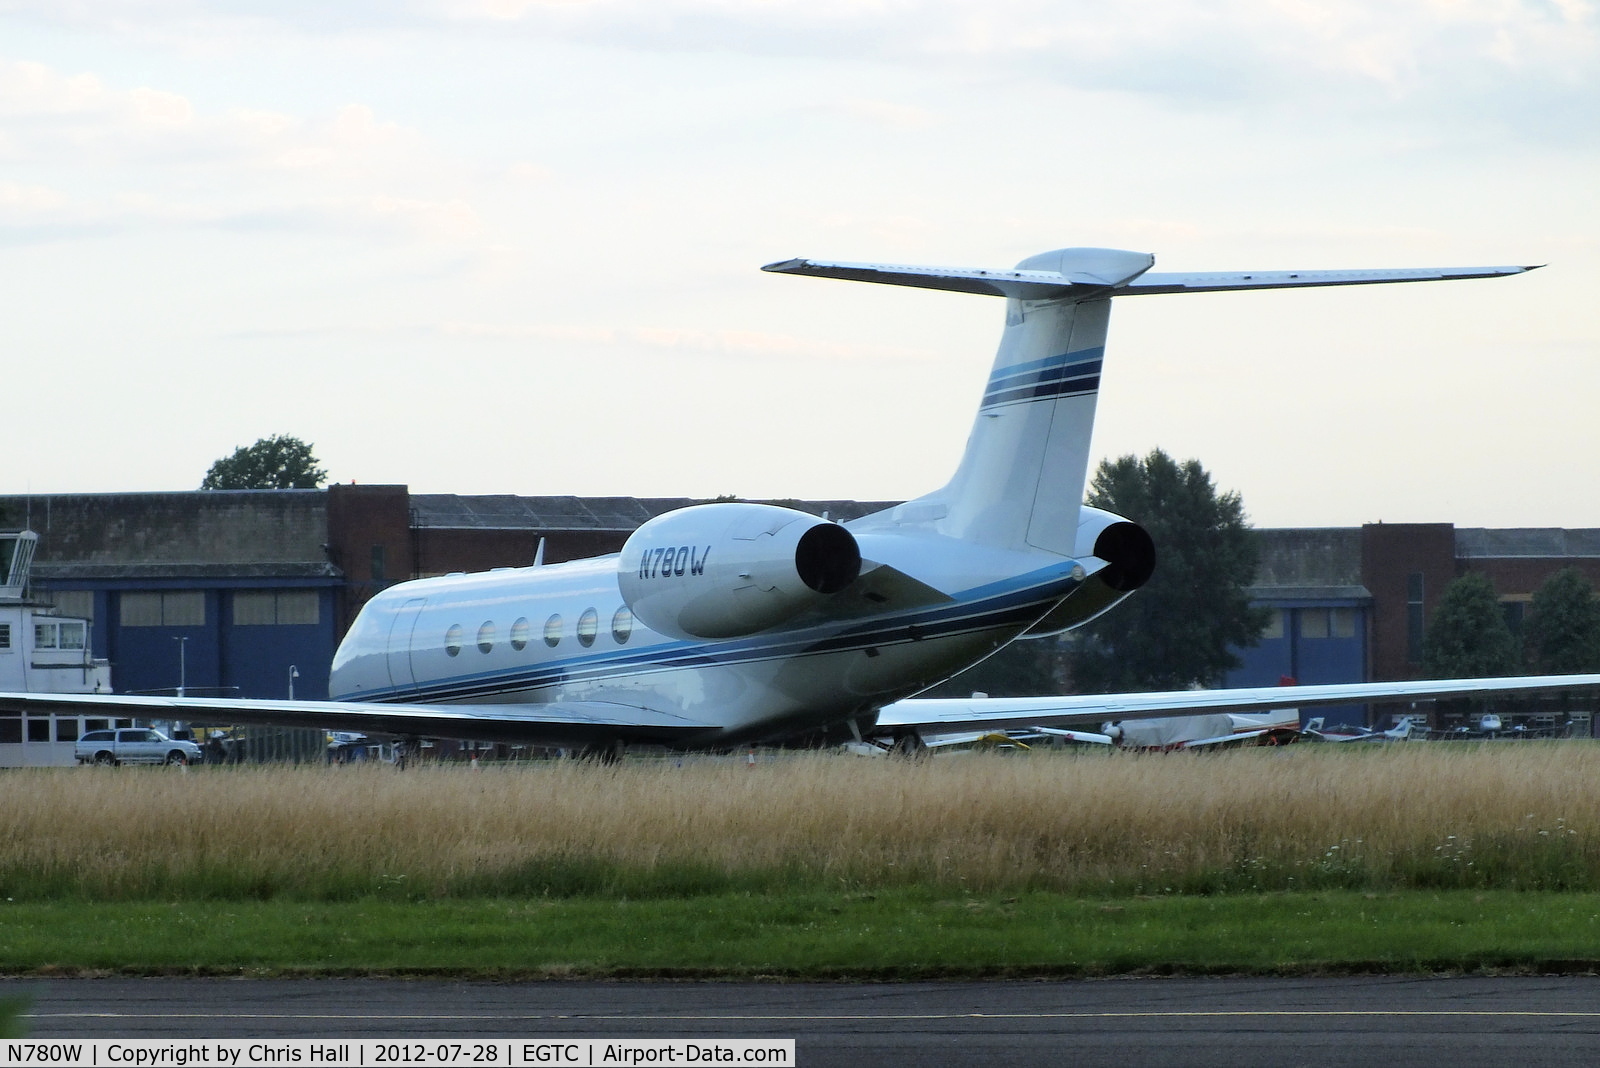 N780W, 1997 Gulfstream Aerospace G-V C/N 530, one of several bizjets parked at Cranfield with visitors for the opening of the London 2012 Olympic games